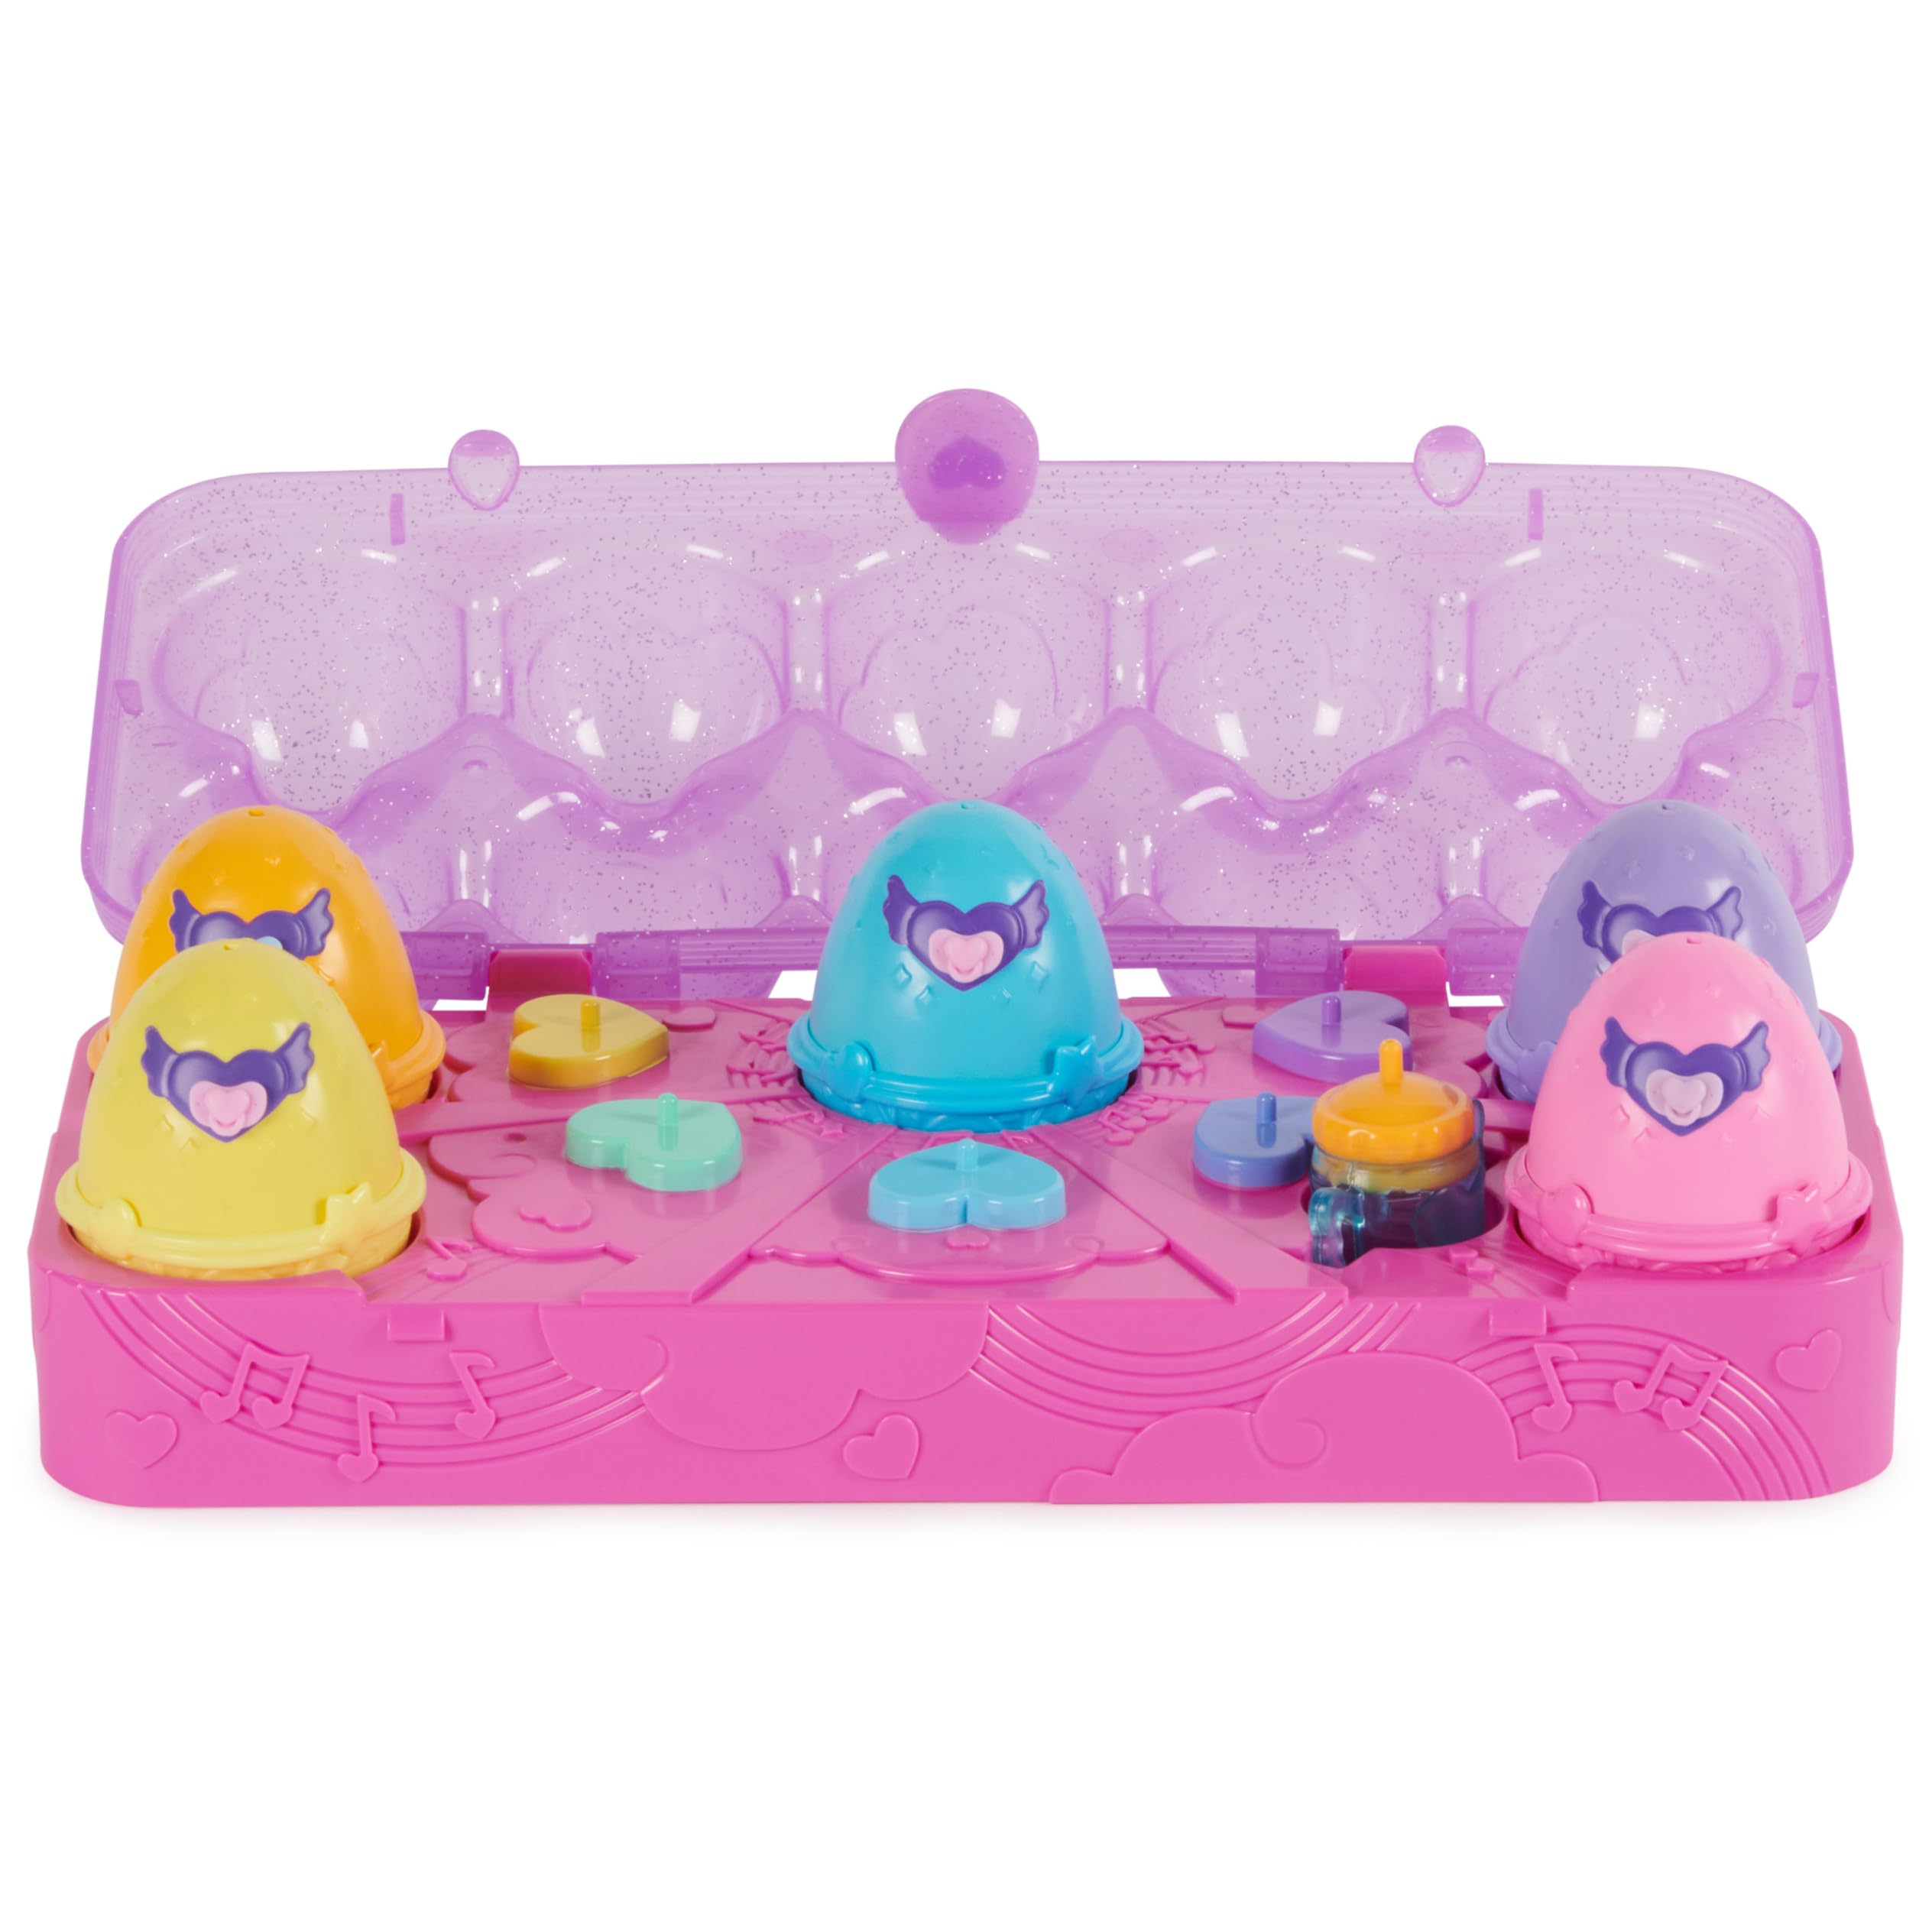 Hatchimals Alive, Egg Carton Toy with 5 Mini Figures in Self-Hatching Eggs, 11 Accessories, Kids Toys for Girls and Boys Ages 3 and up